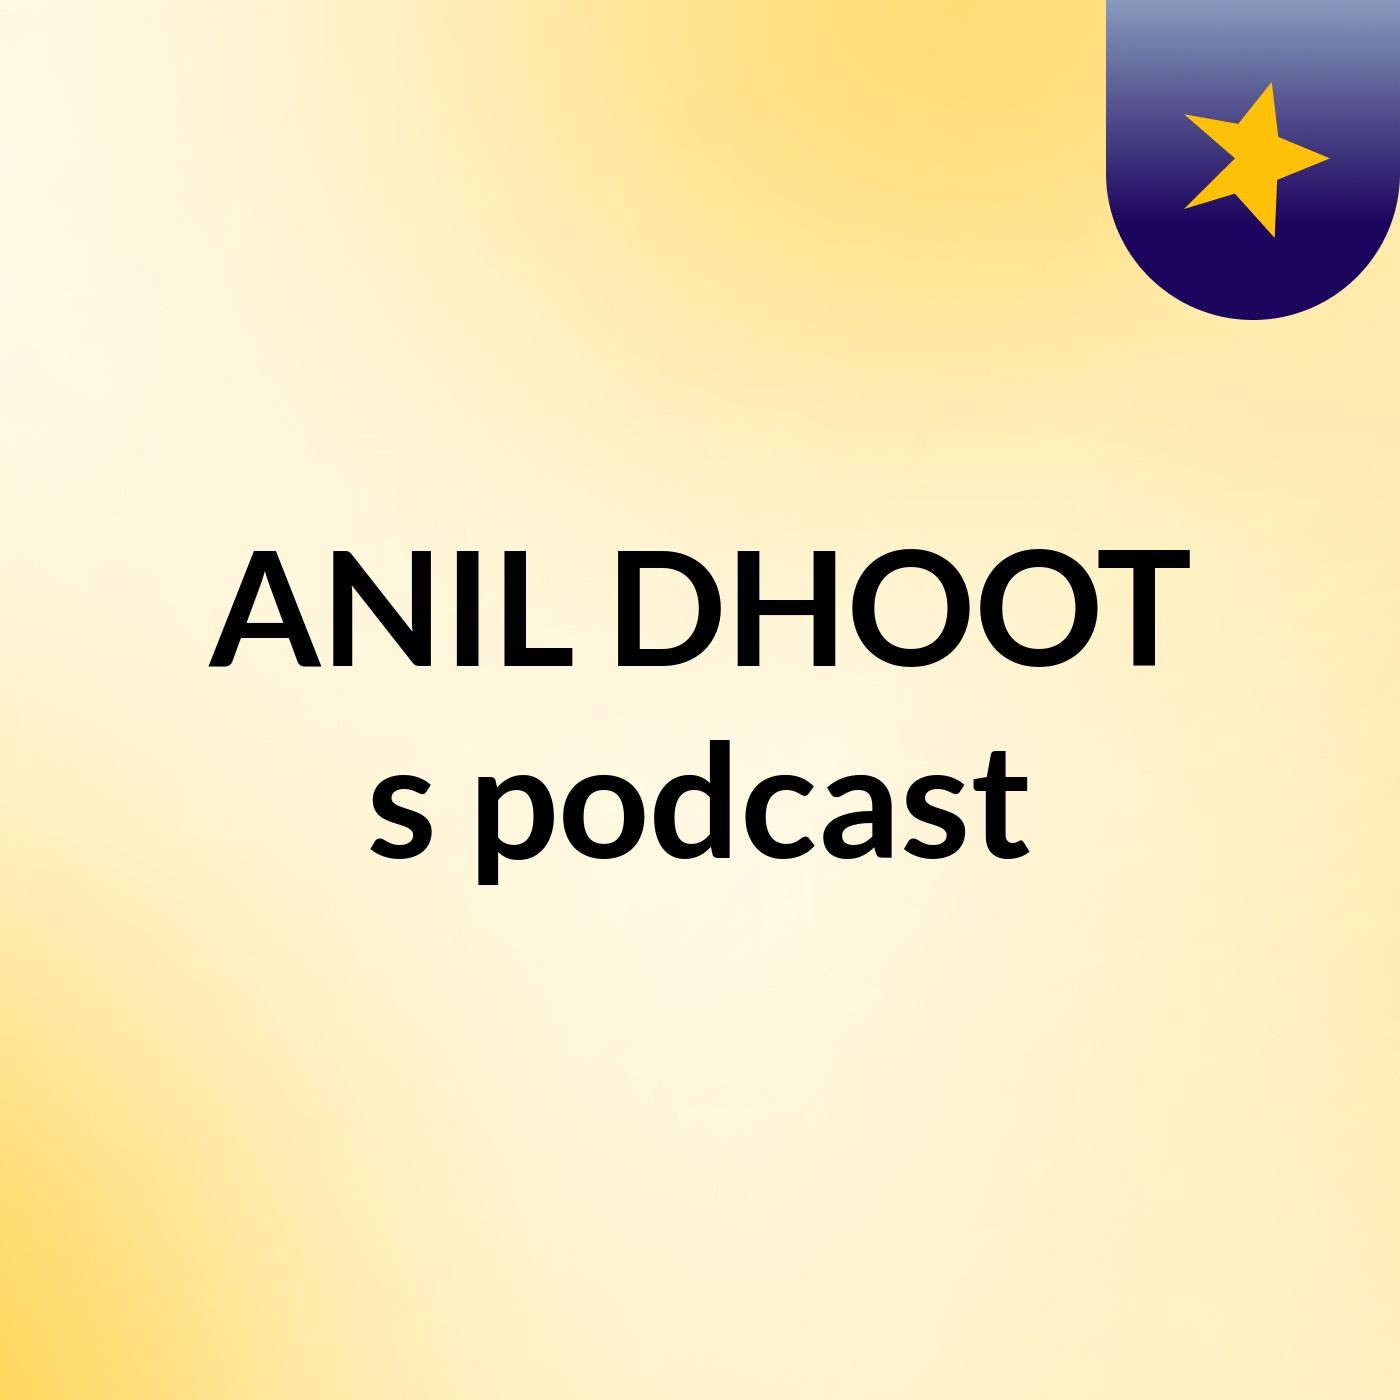 Episode 1 - ANIL DHOOT's podcast